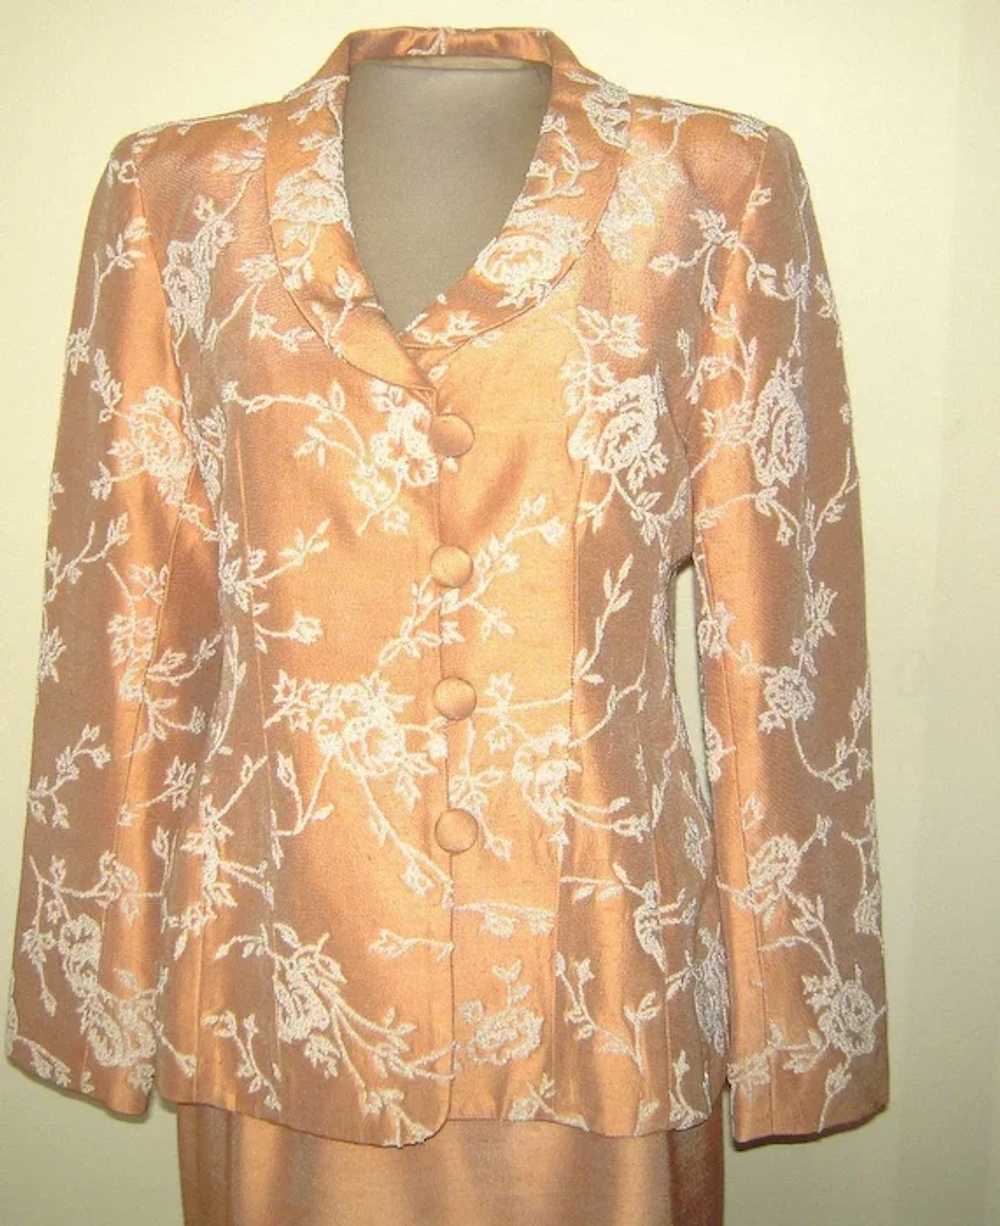 Vintage Peach Tan Suit with White Beading - image 3